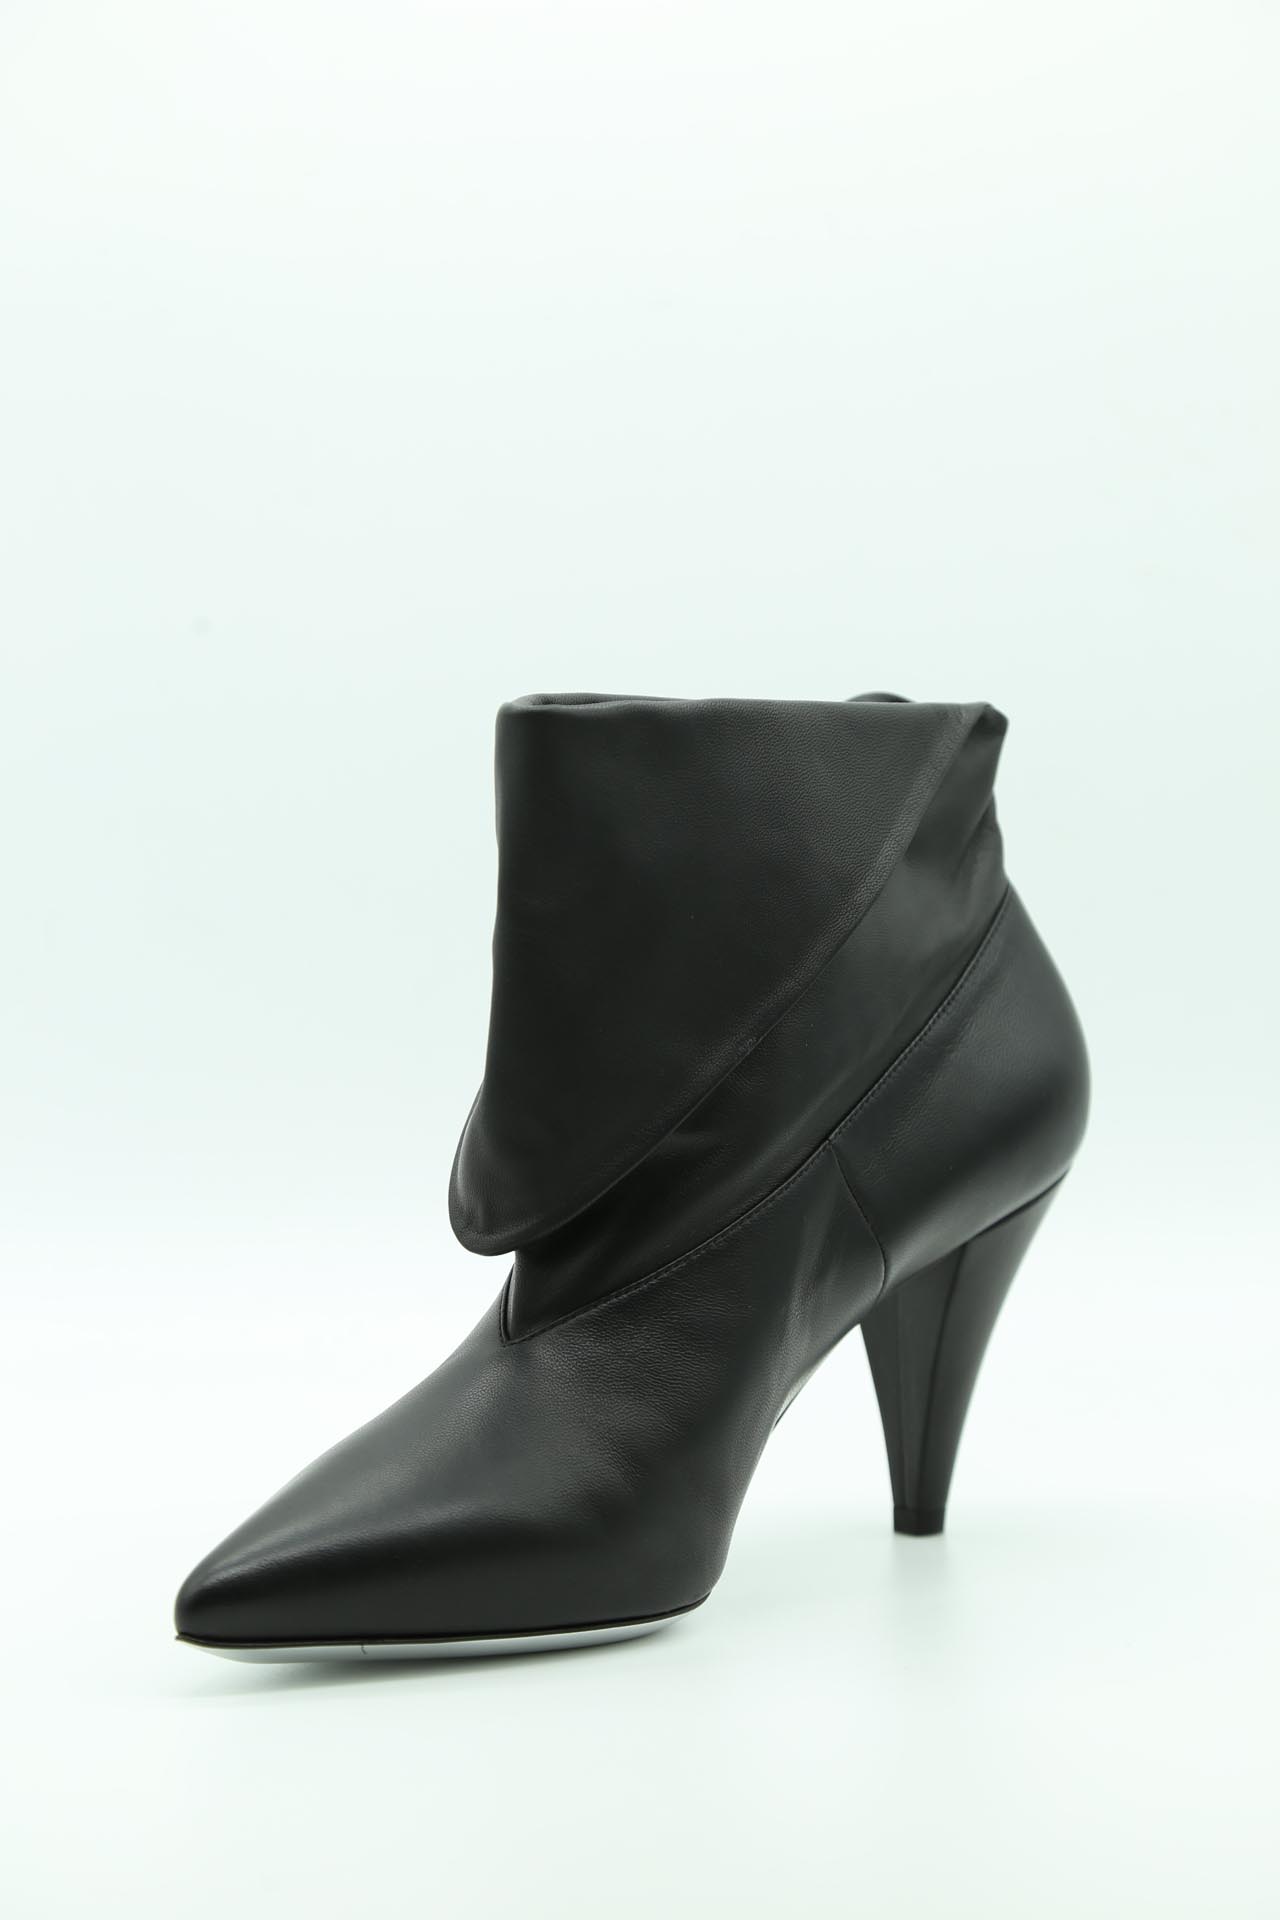 Givenchy, Ankle Boots